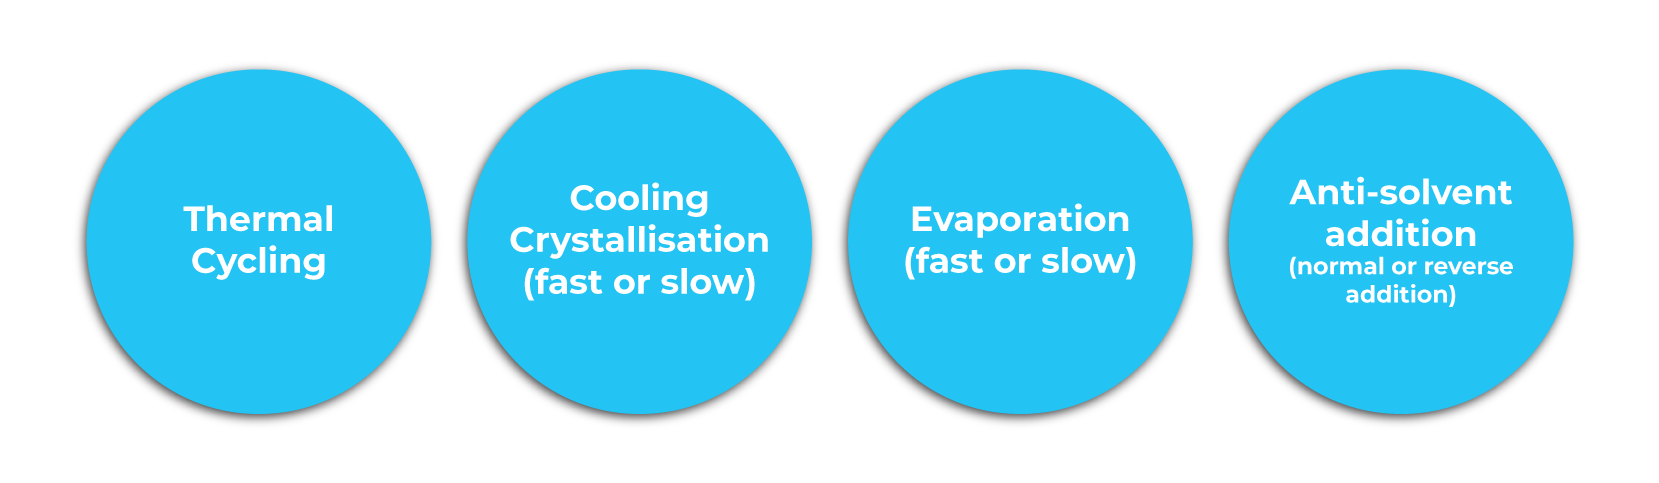 Thermal Cycling, Cooling Crystallisation (fast or slow), Evaporation (fast or slow), Anti-solvent Addition (normal or reverse addition)